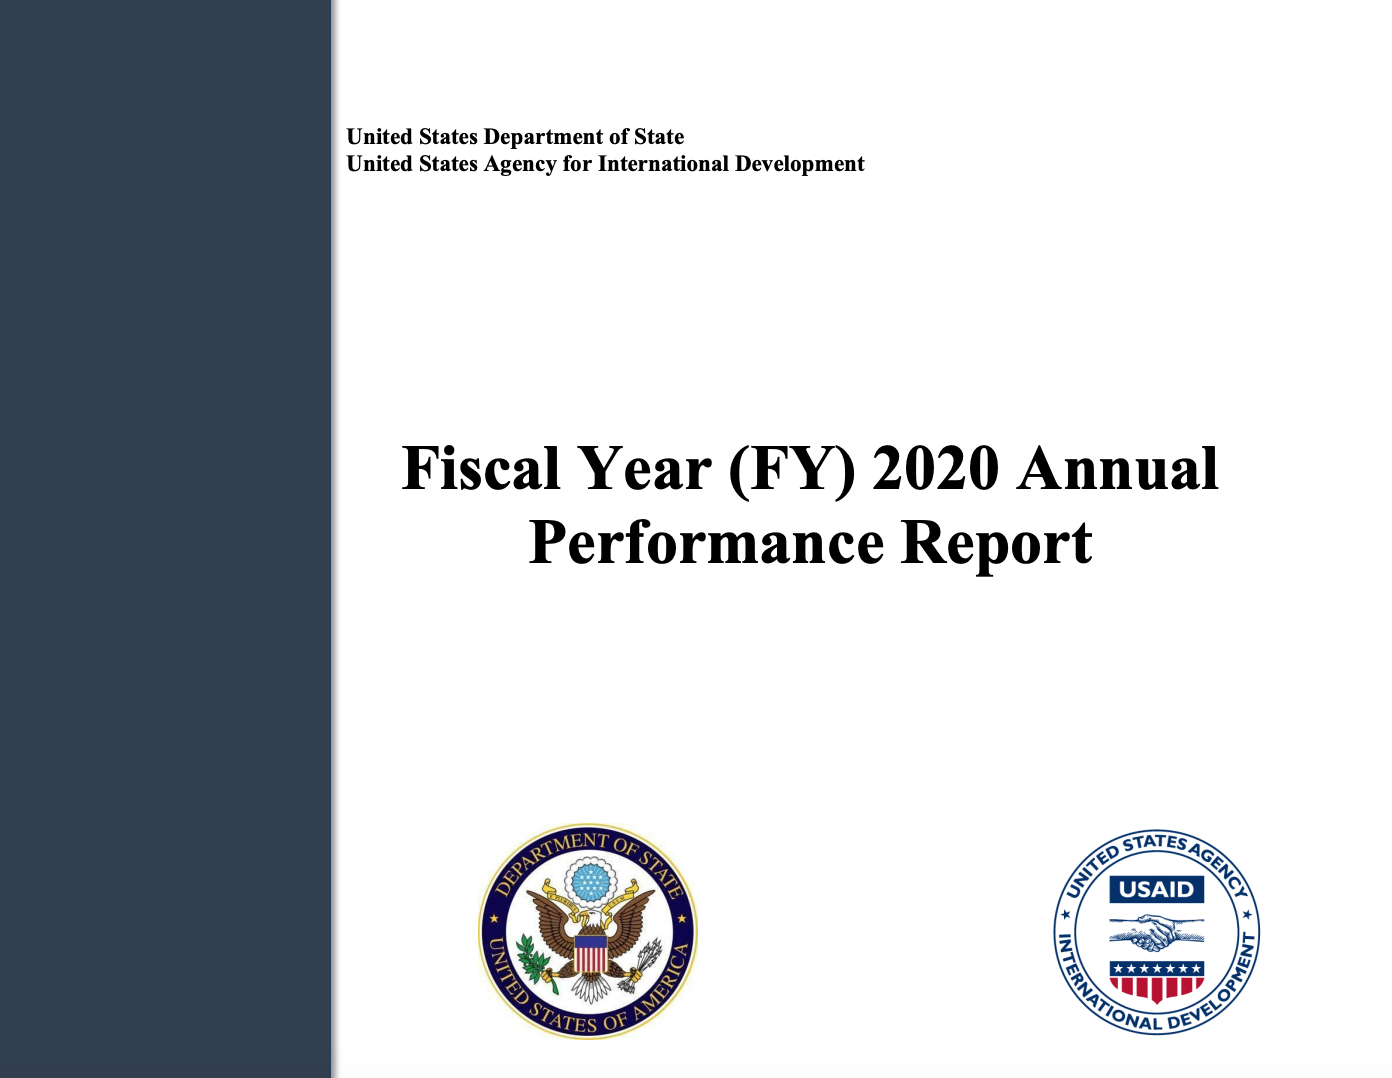 FY 2020 Annual Performance Report Cover